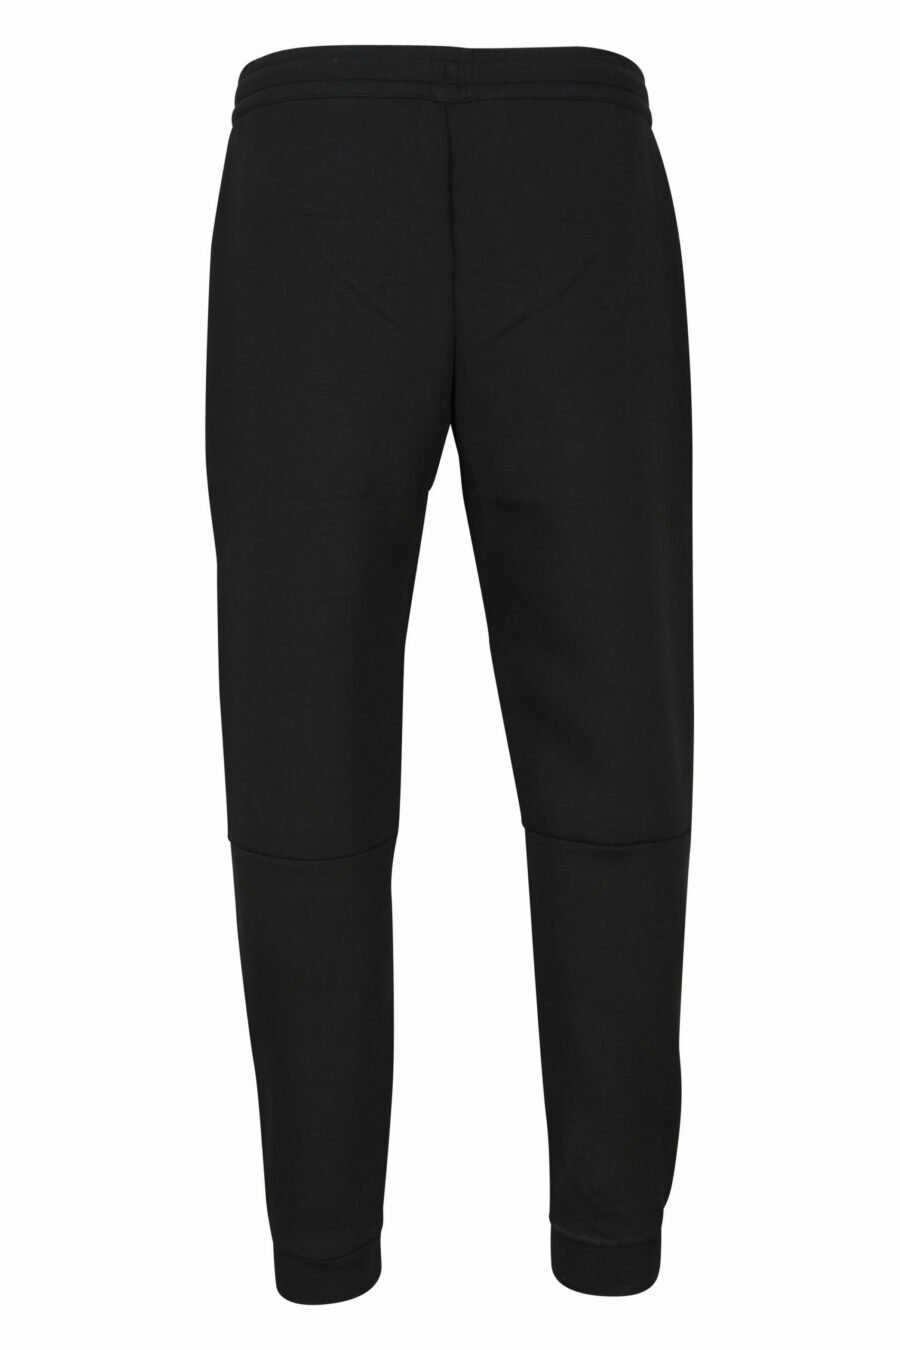 Tracksuit bottoms black with mini logo shield "lux identity" - 8056787978737 2 scaled